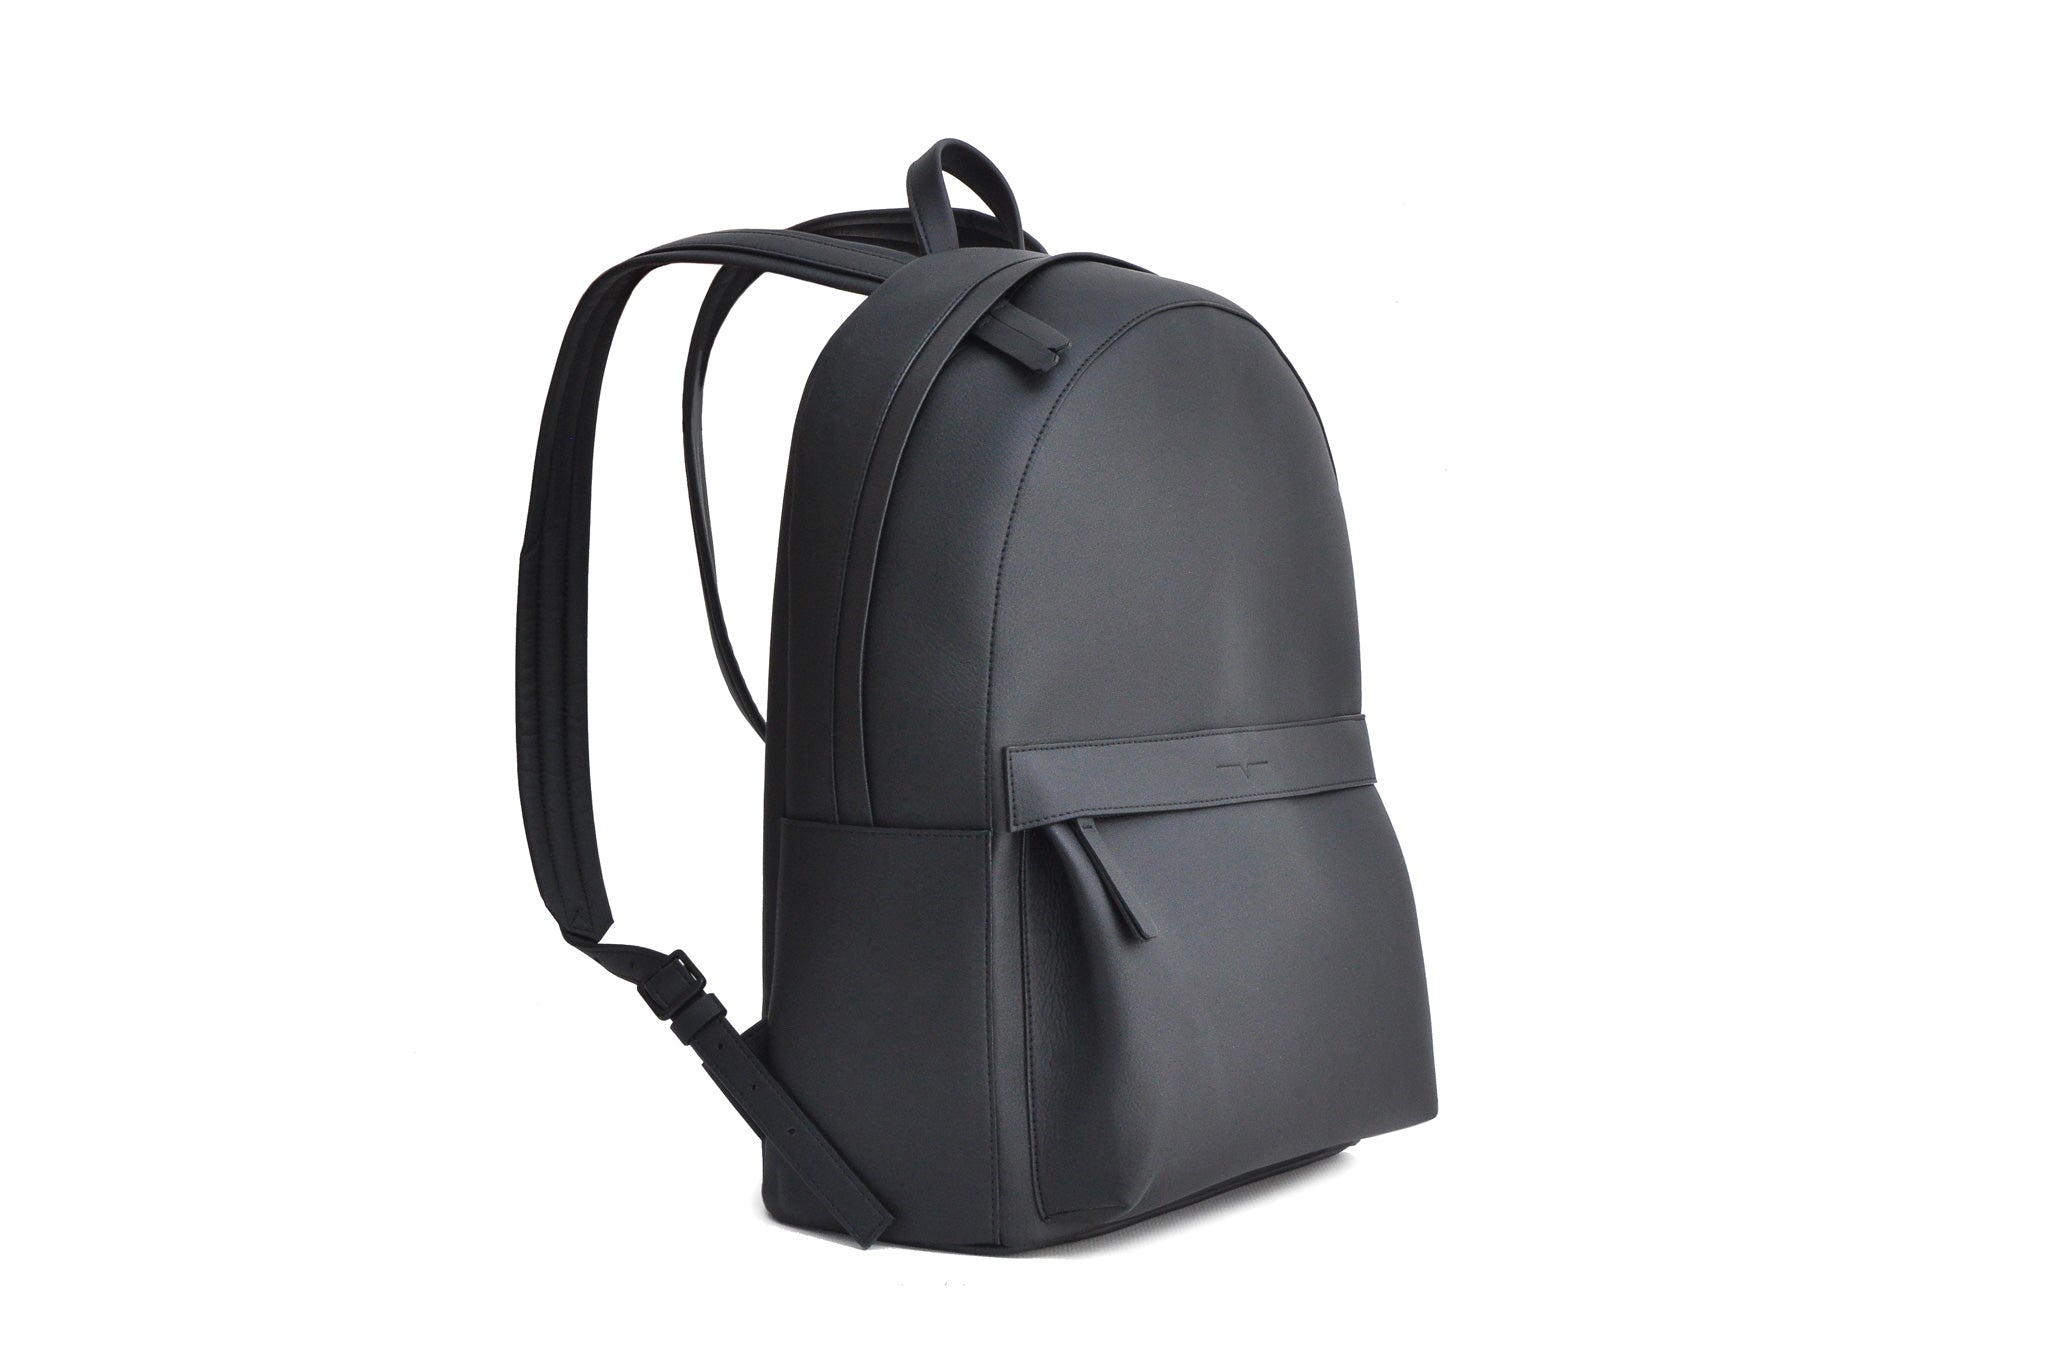 The Classic Backpack